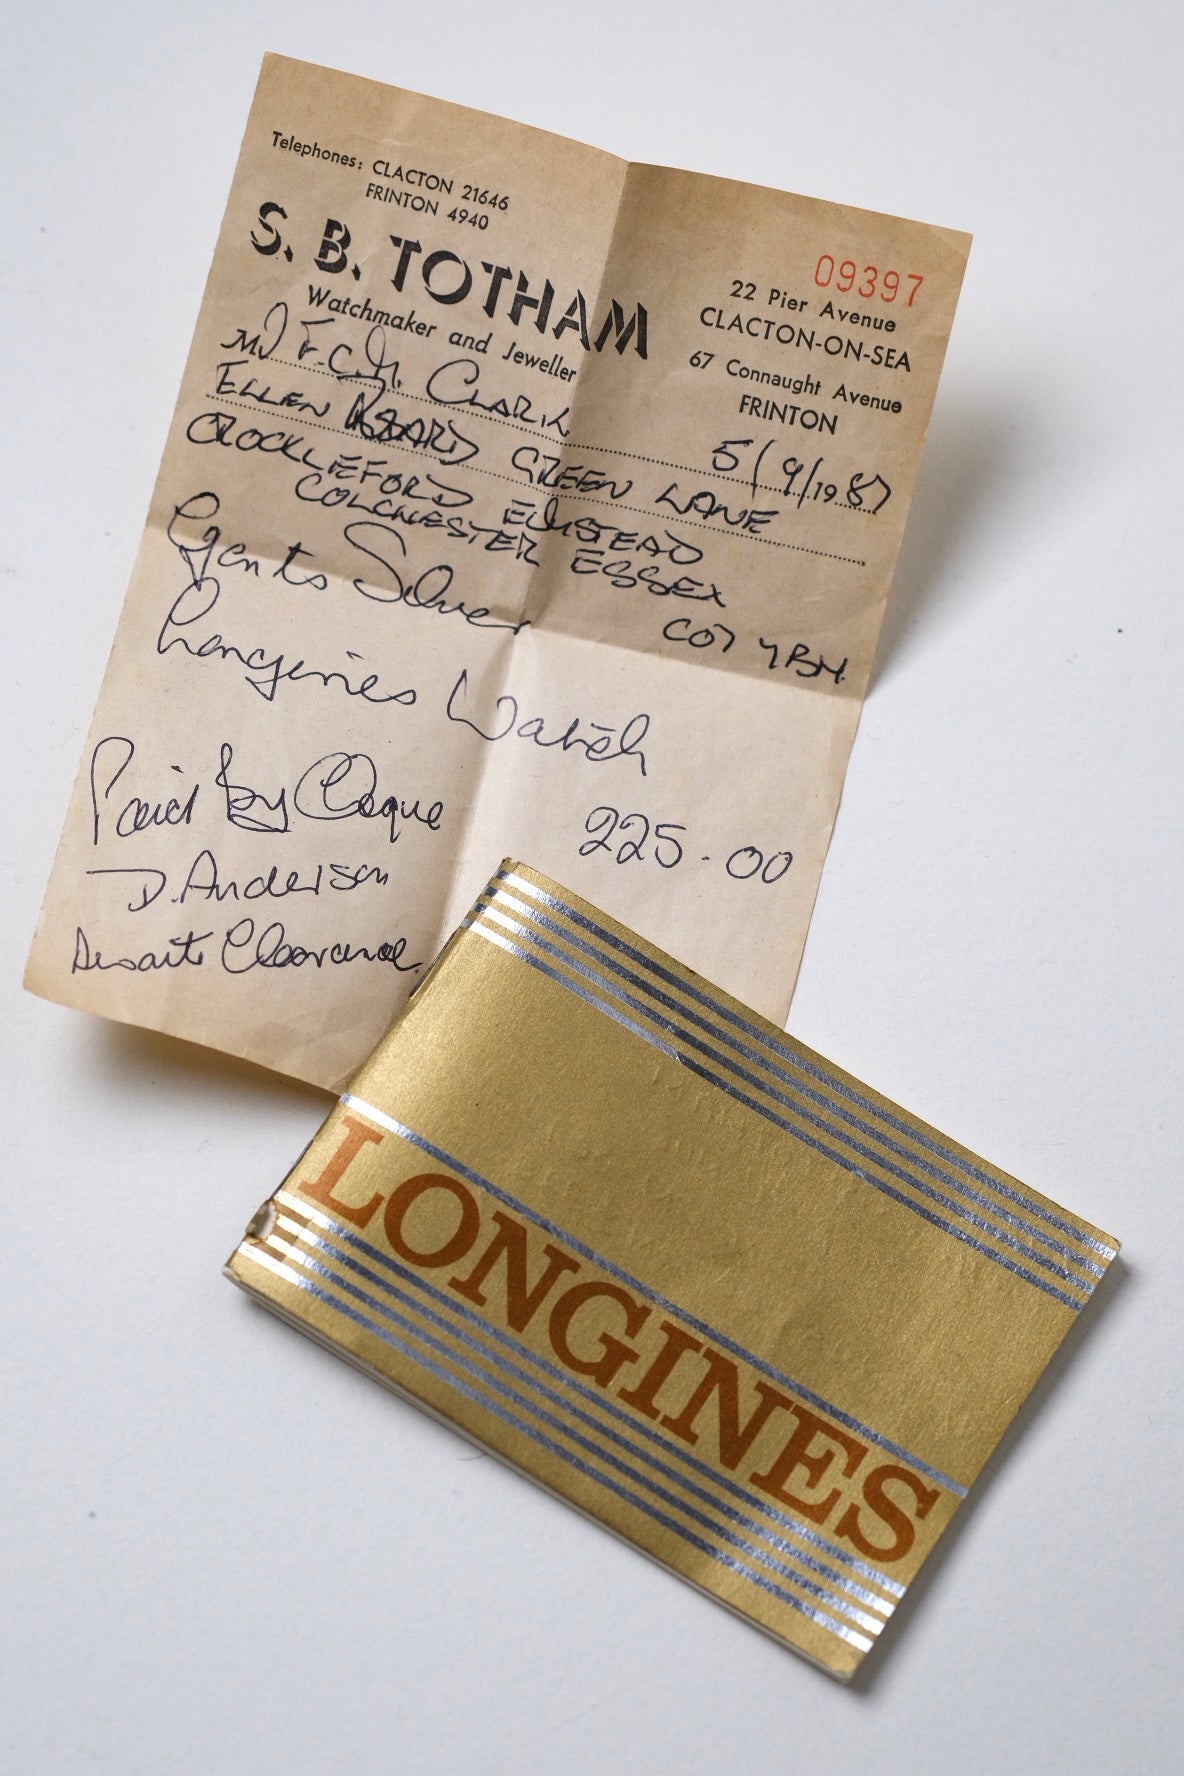 LONGINES 925 Silver TV Dial Manual Wind Box and Papers (1975)